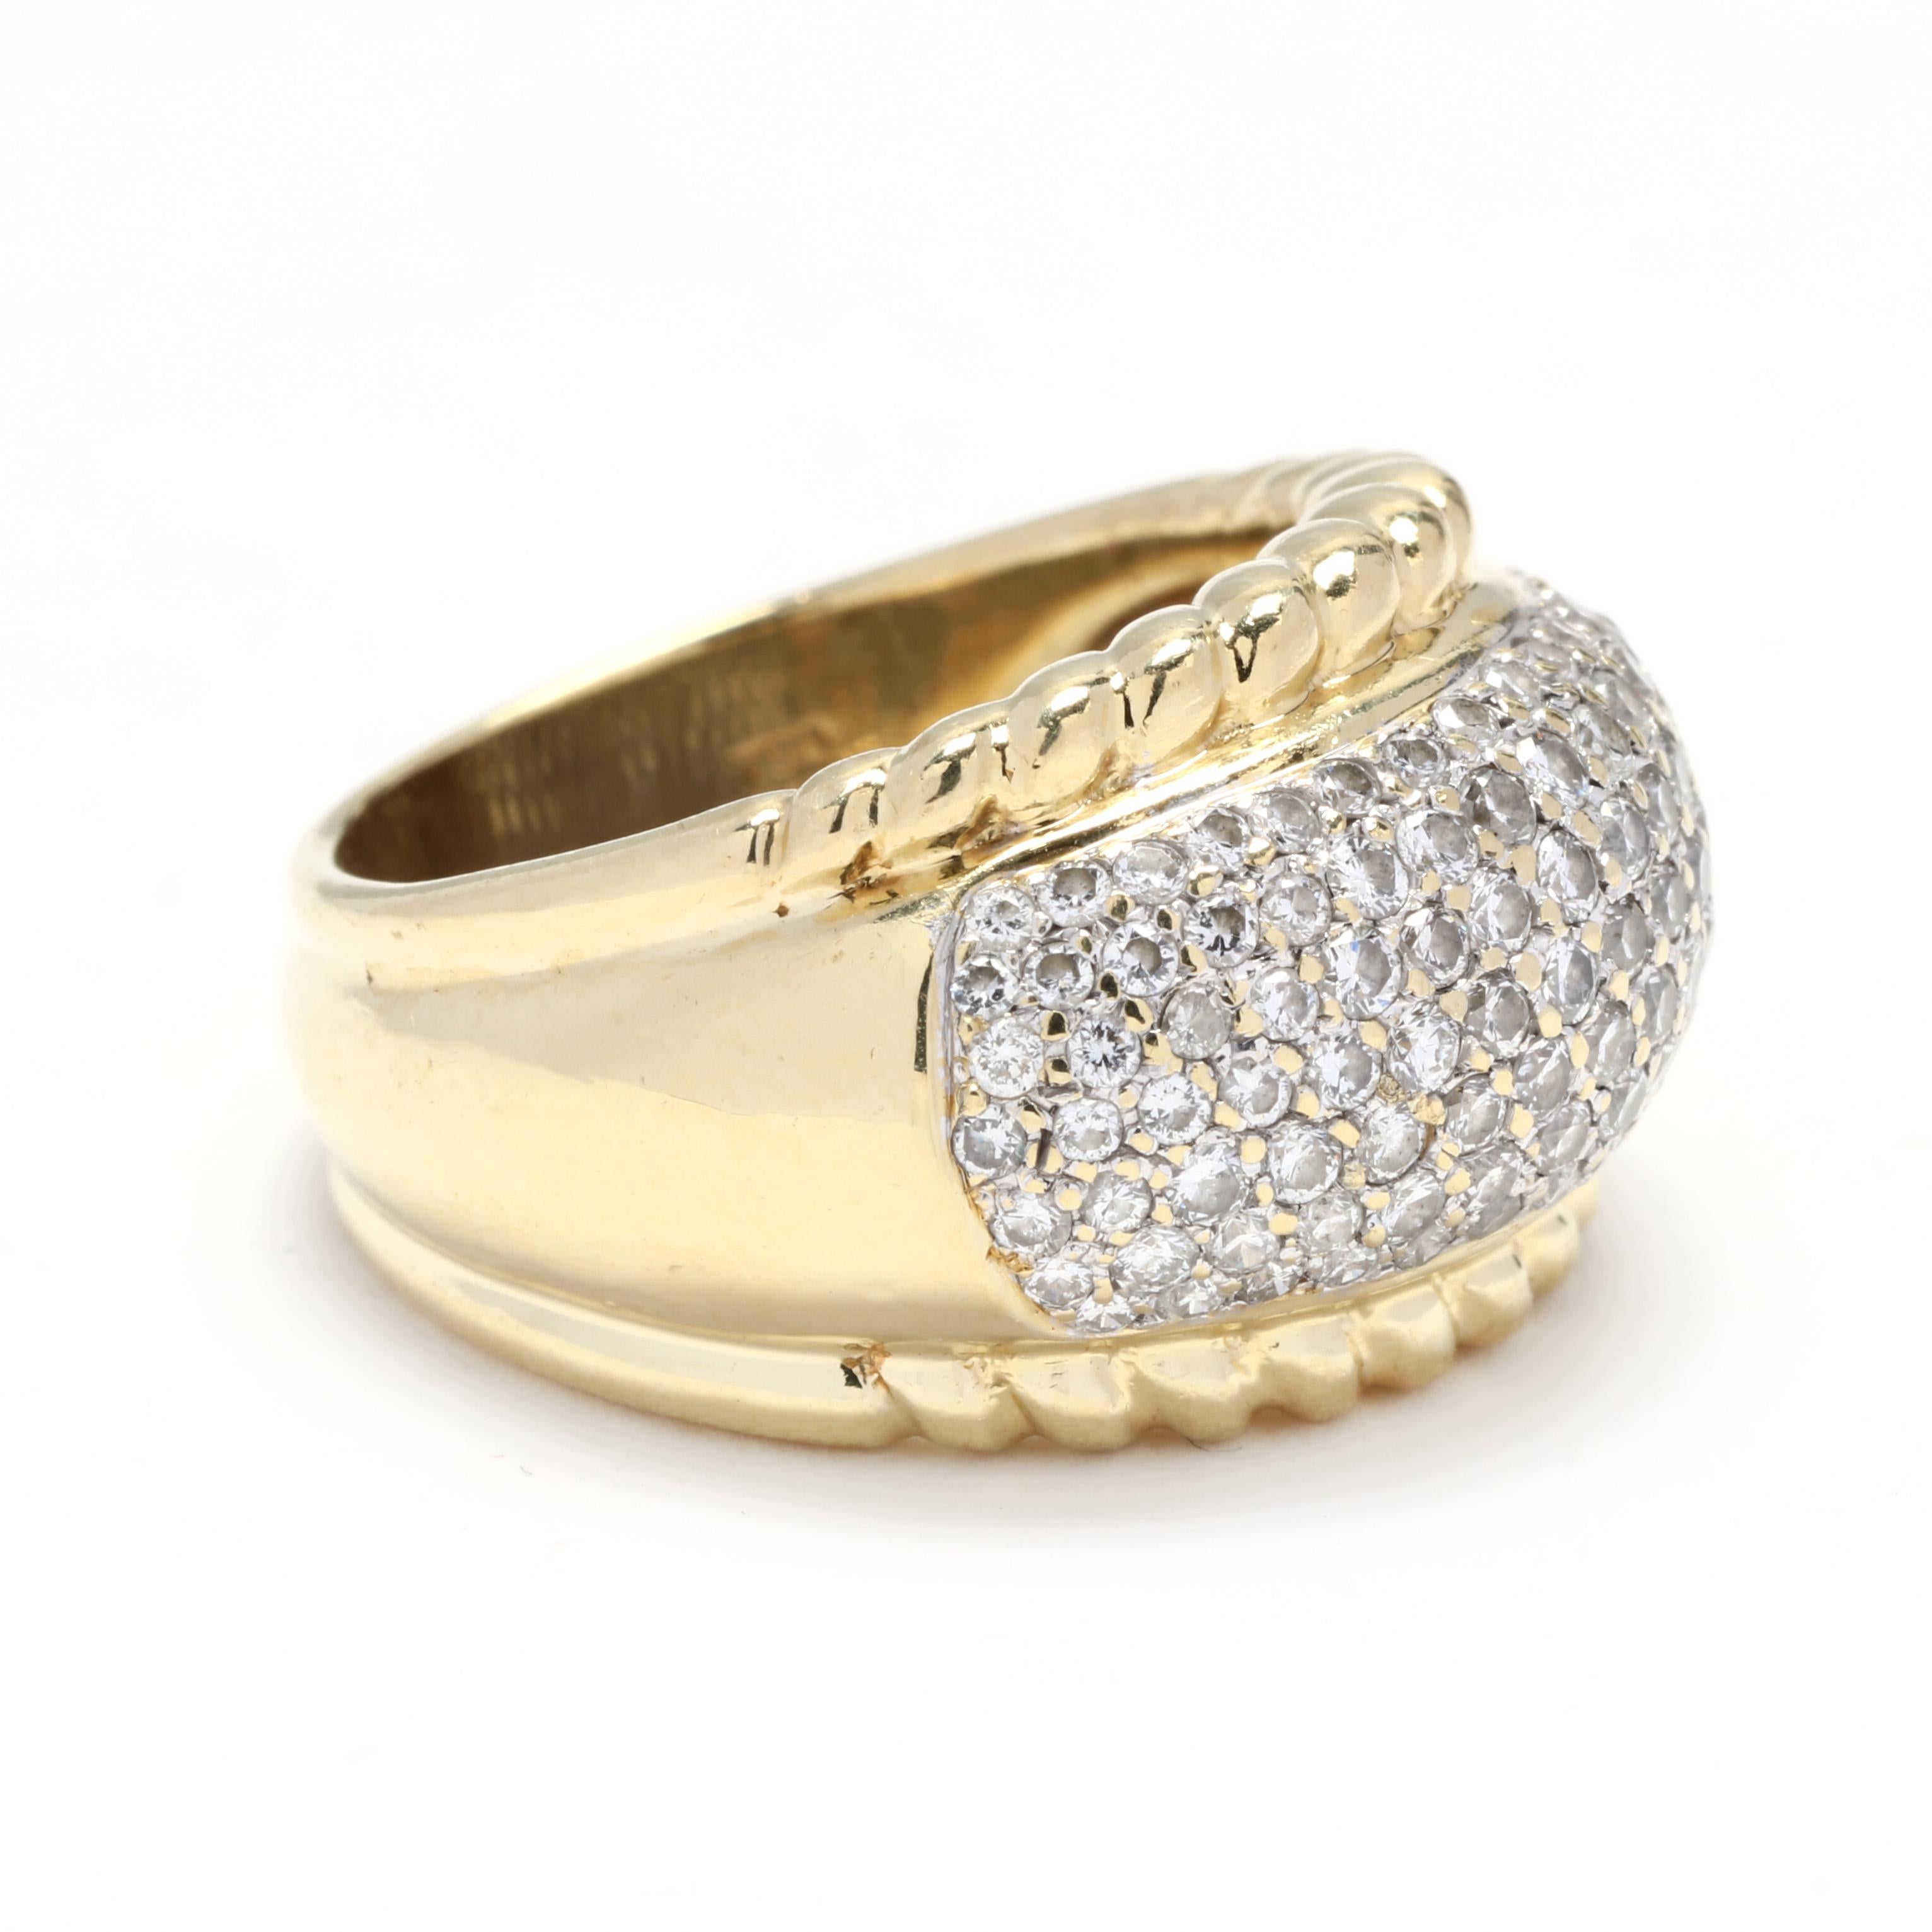 18k yellow and white gold diamond dome ring. An impressive wide diamond band that is domed in the center. The diamonds are set in white gold while the rest of the ring is crafted in yellow gold creating a beautiful color contrast. The edges where